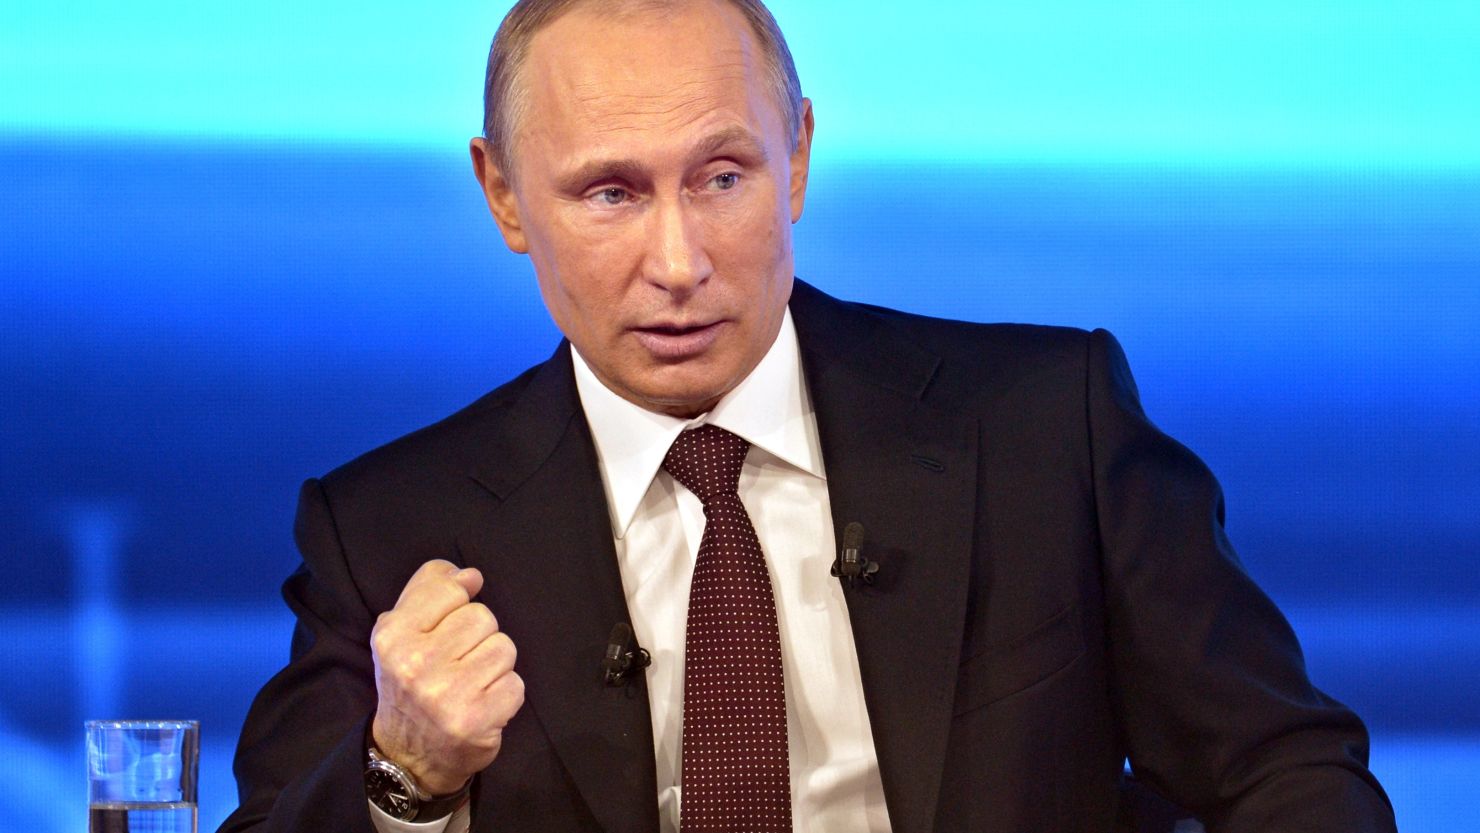 Alexander Motyl says Russian President Vladimir Putin took a belligerent stand on Ukraine in an interview on April 17.